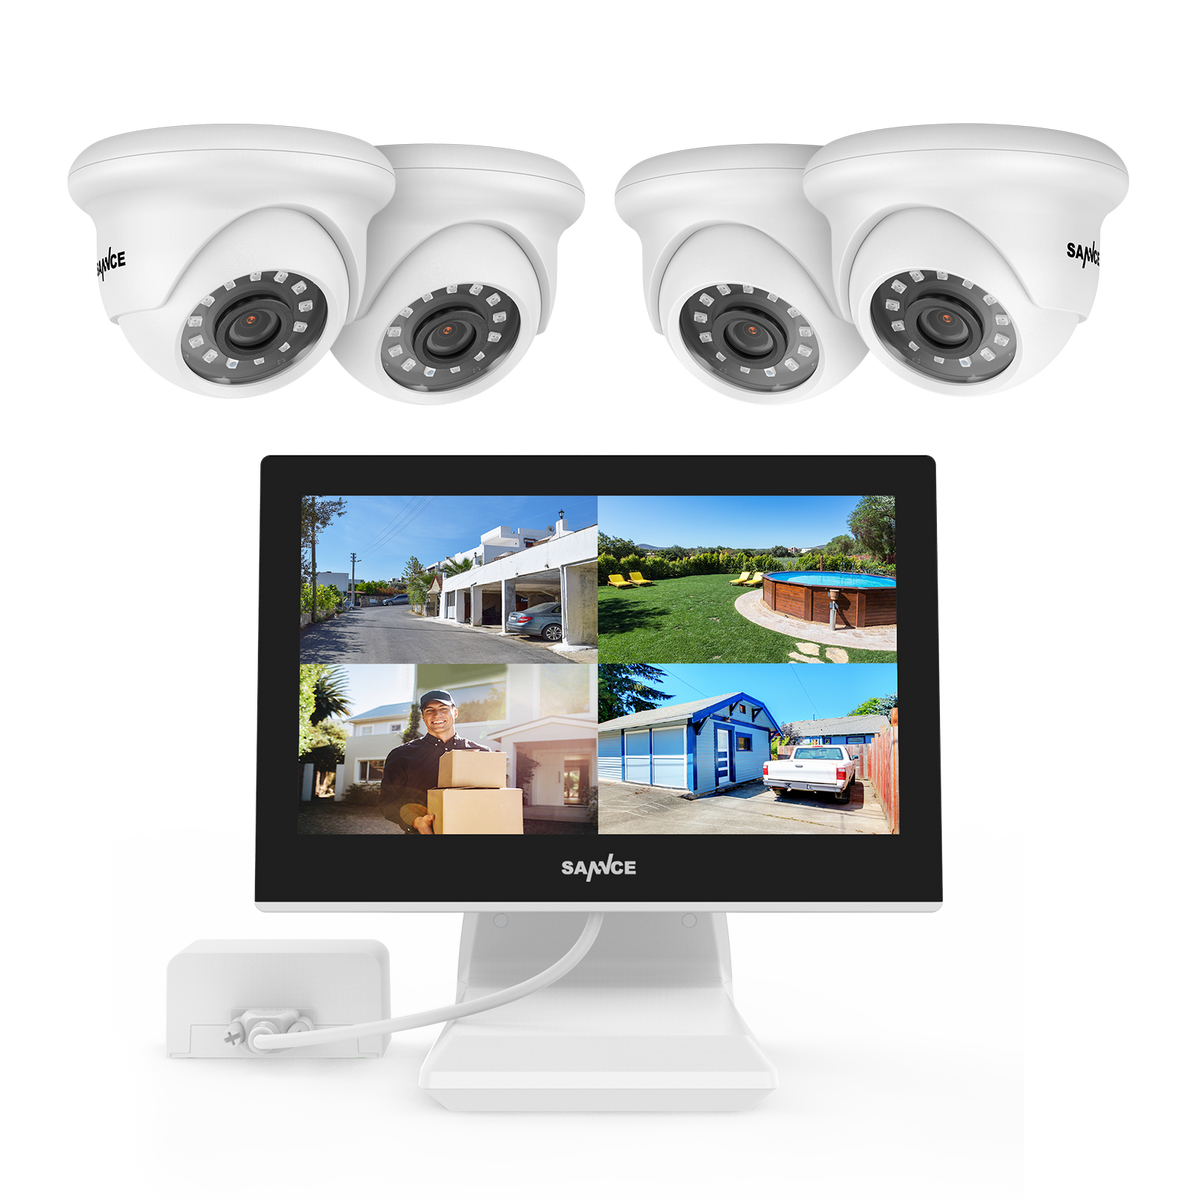 1080P 4 Channel DVR w/ 4pcs 2MP Outdoor Dome Security Camera System, 10.1’’ LCD Colorful Monitor